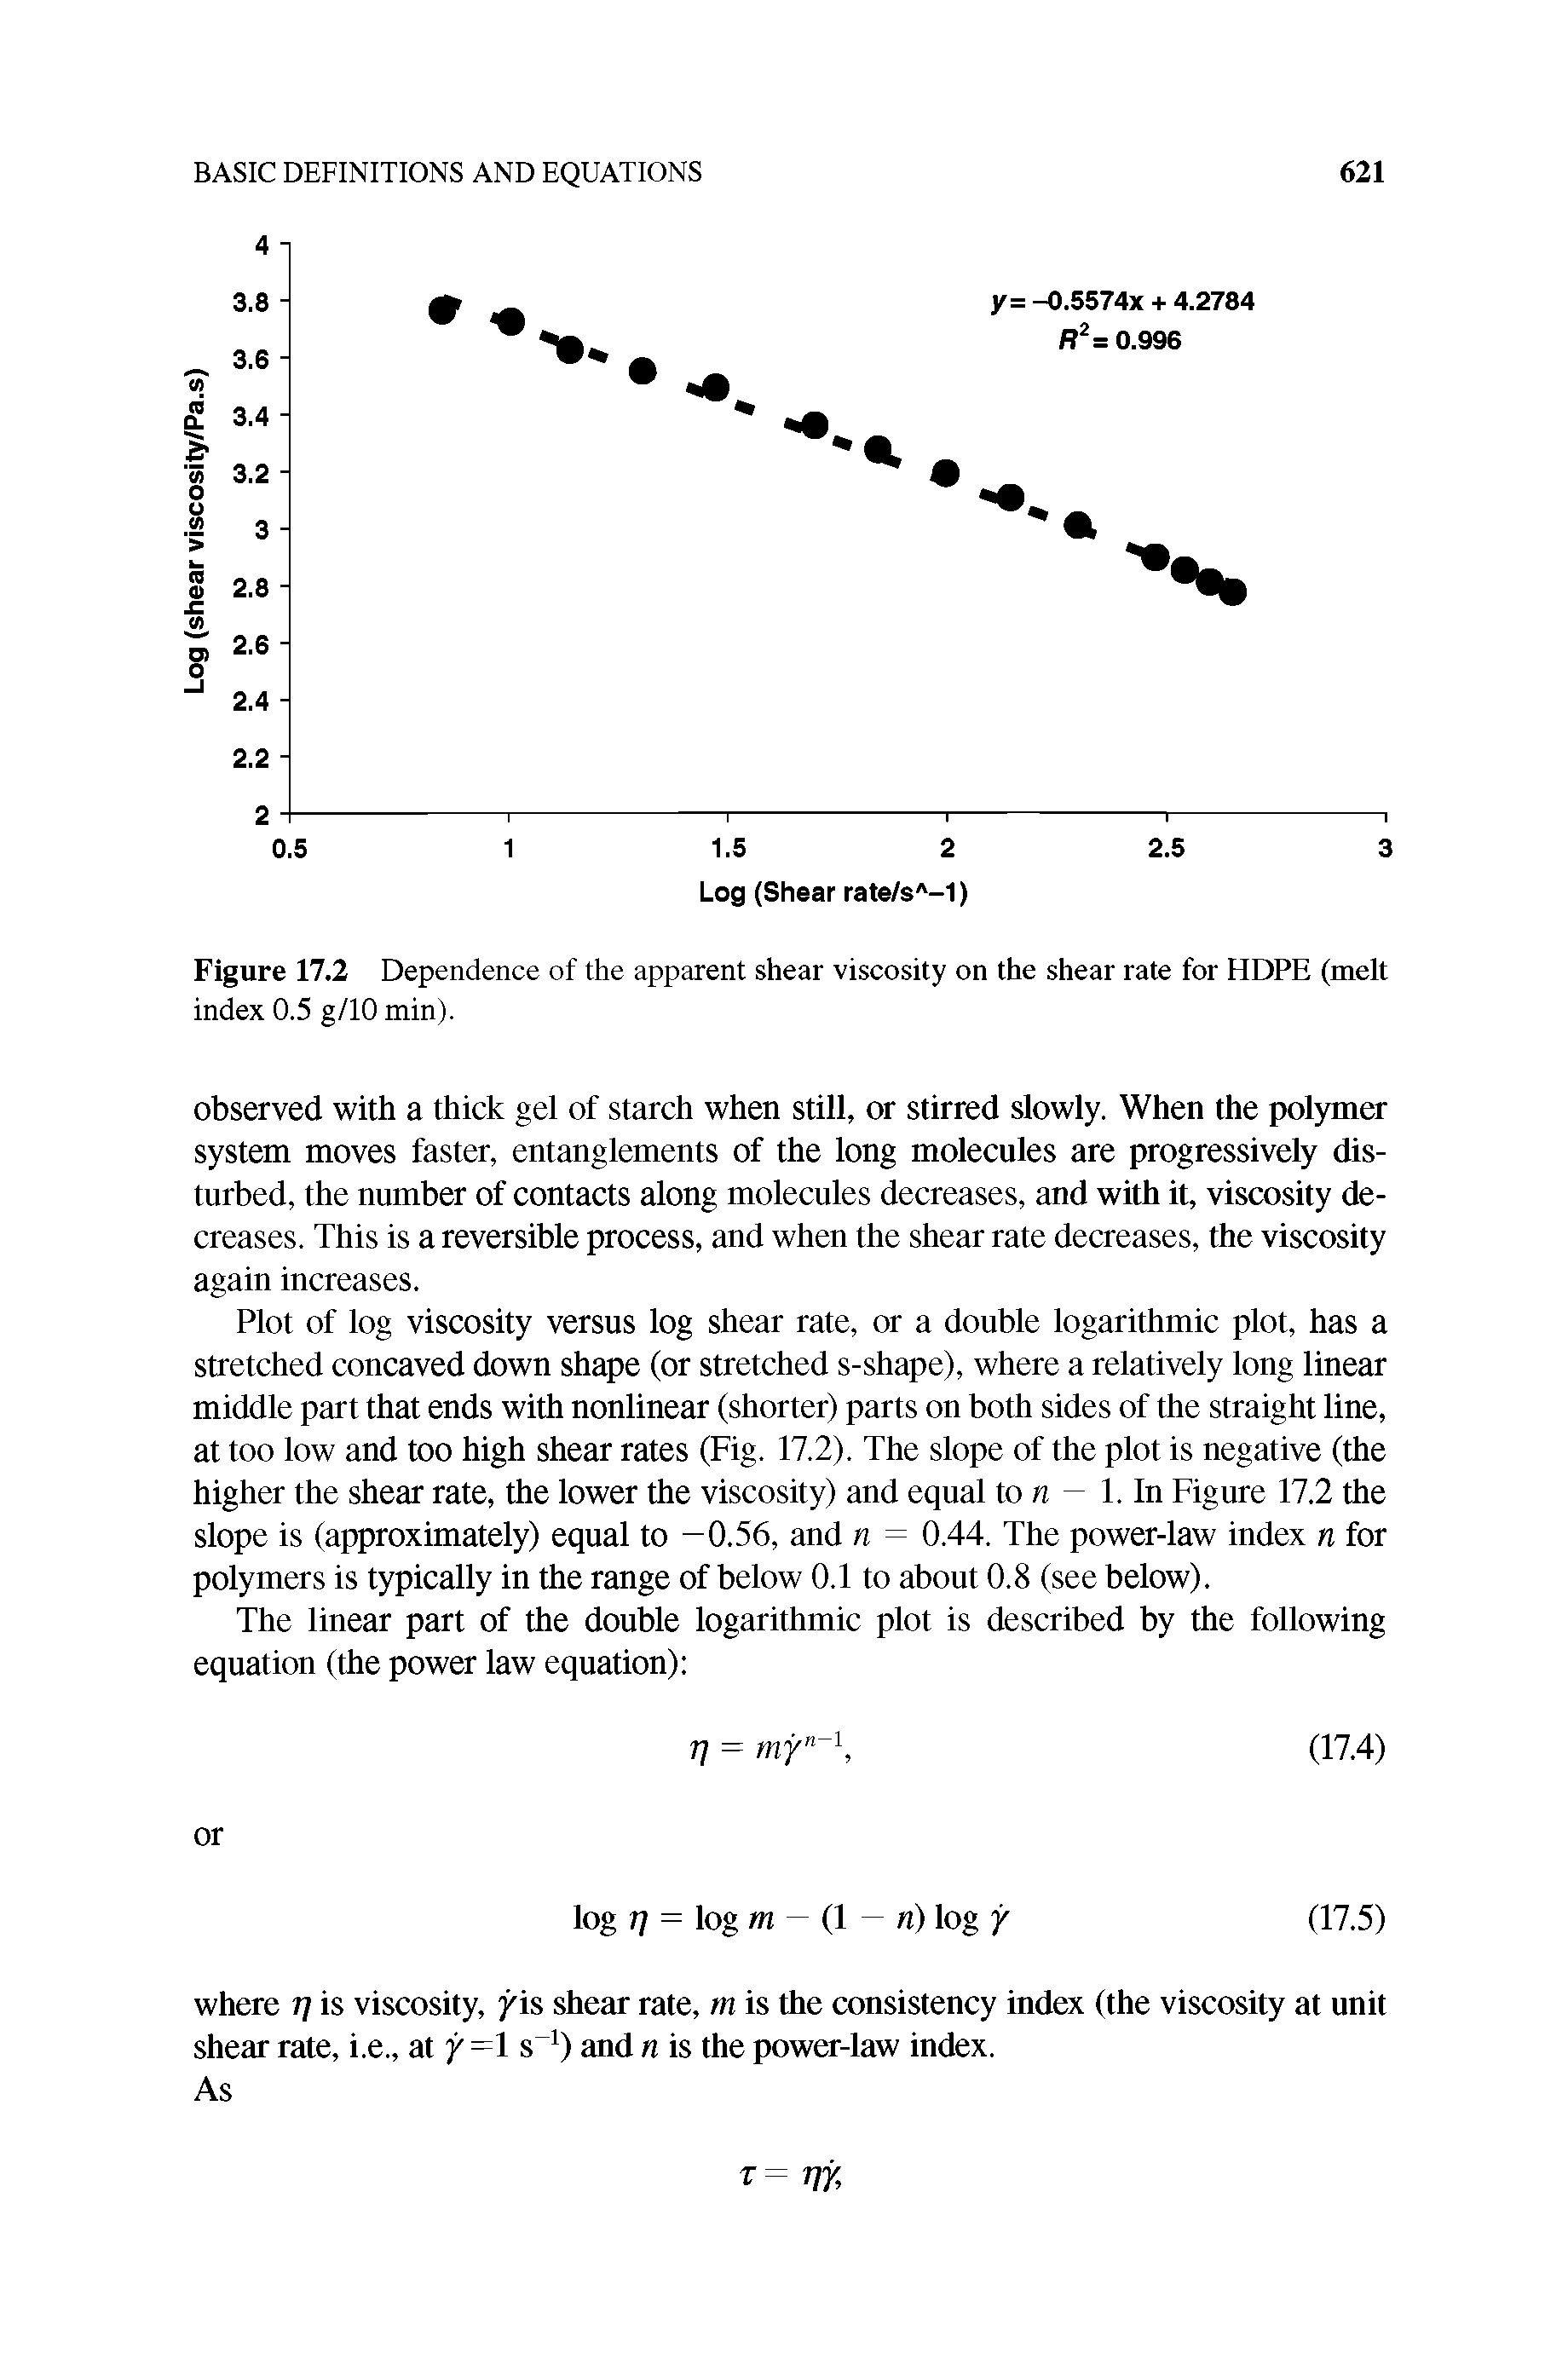 Figure 17.2 Dependence of the apparent shear viscosity on the shear rate for HDPE (melt index 0.5 g/10 min).